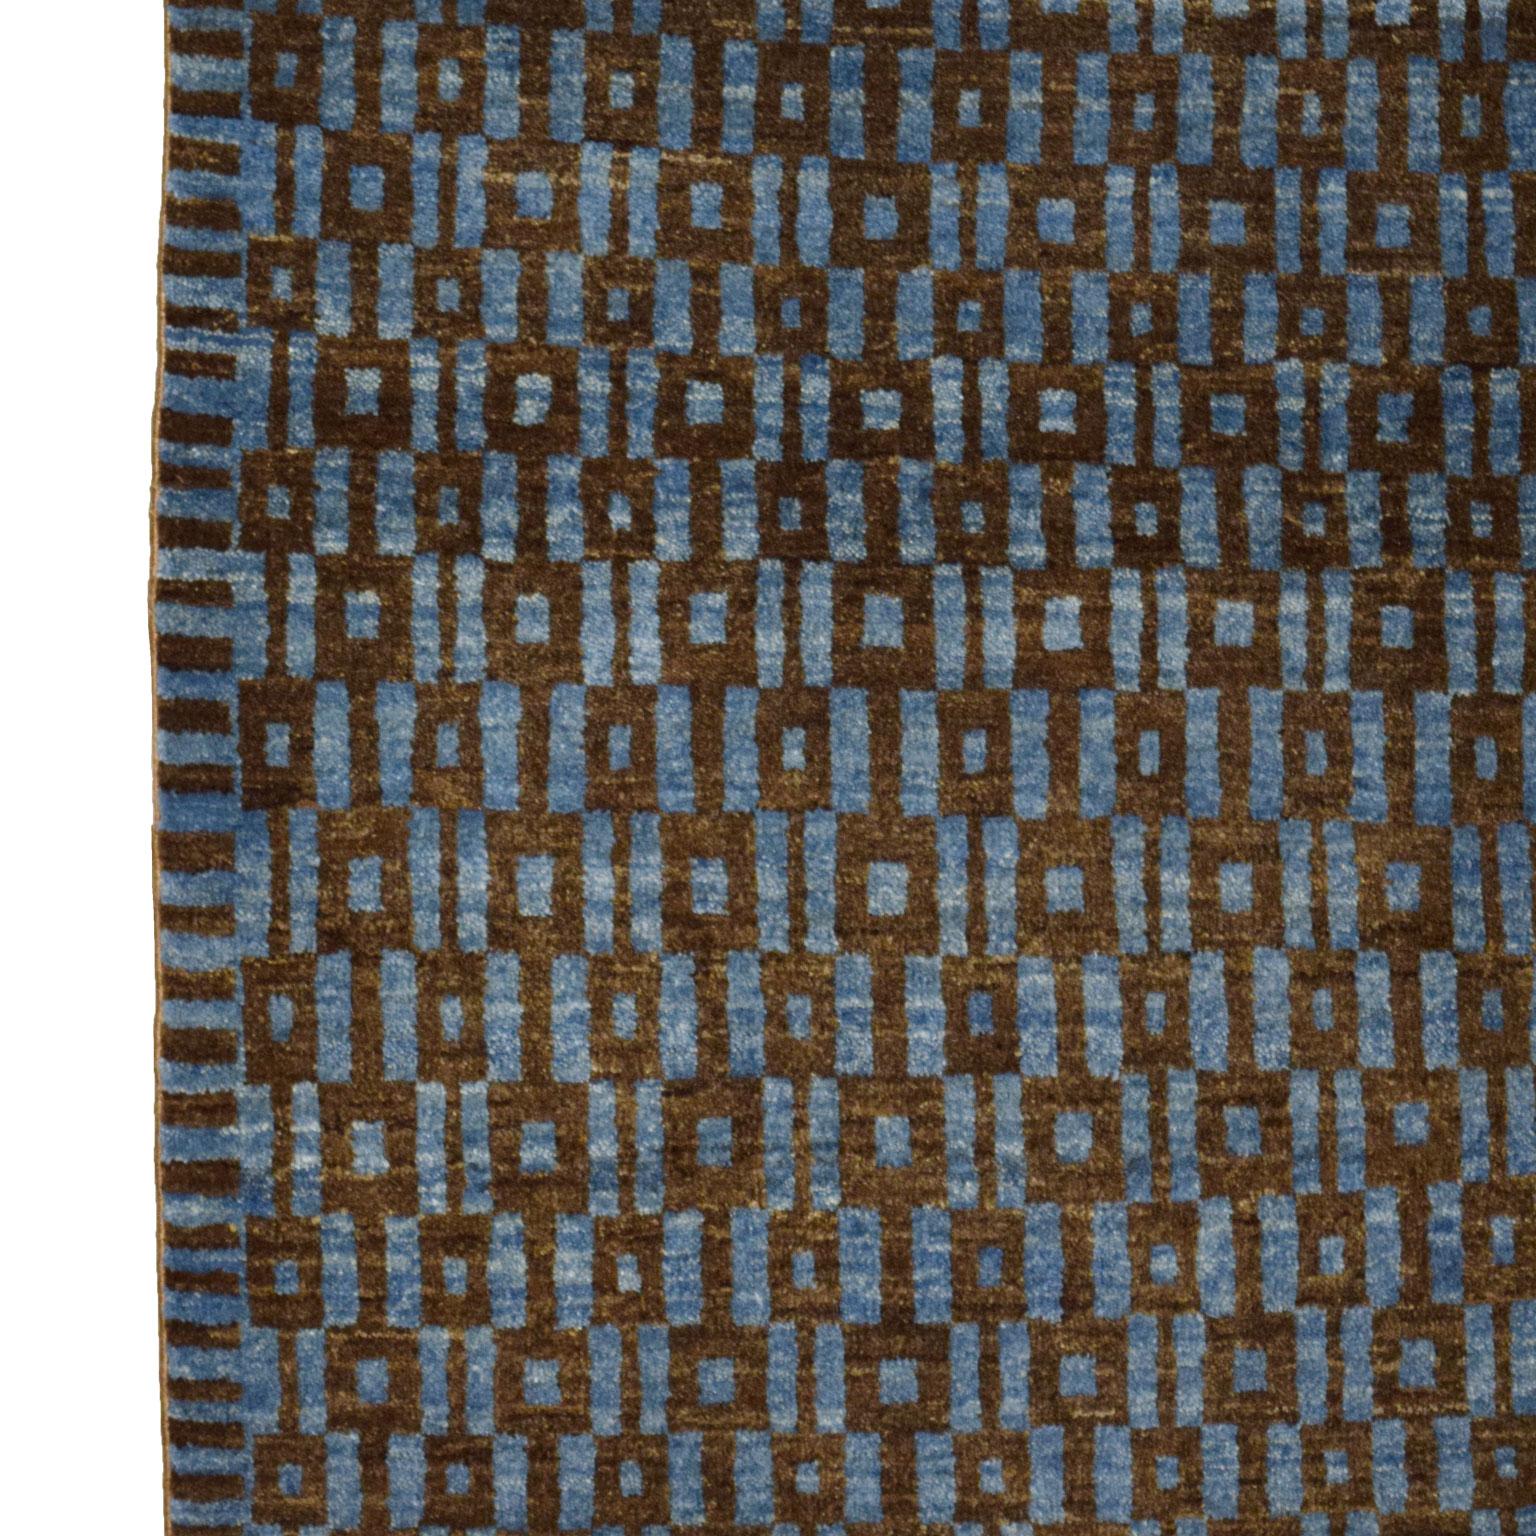 Vegetable Dyed Contemporary Persian Rug, Blue and Brown Wool, Orley Shabahang, 4' x 6' For Sale